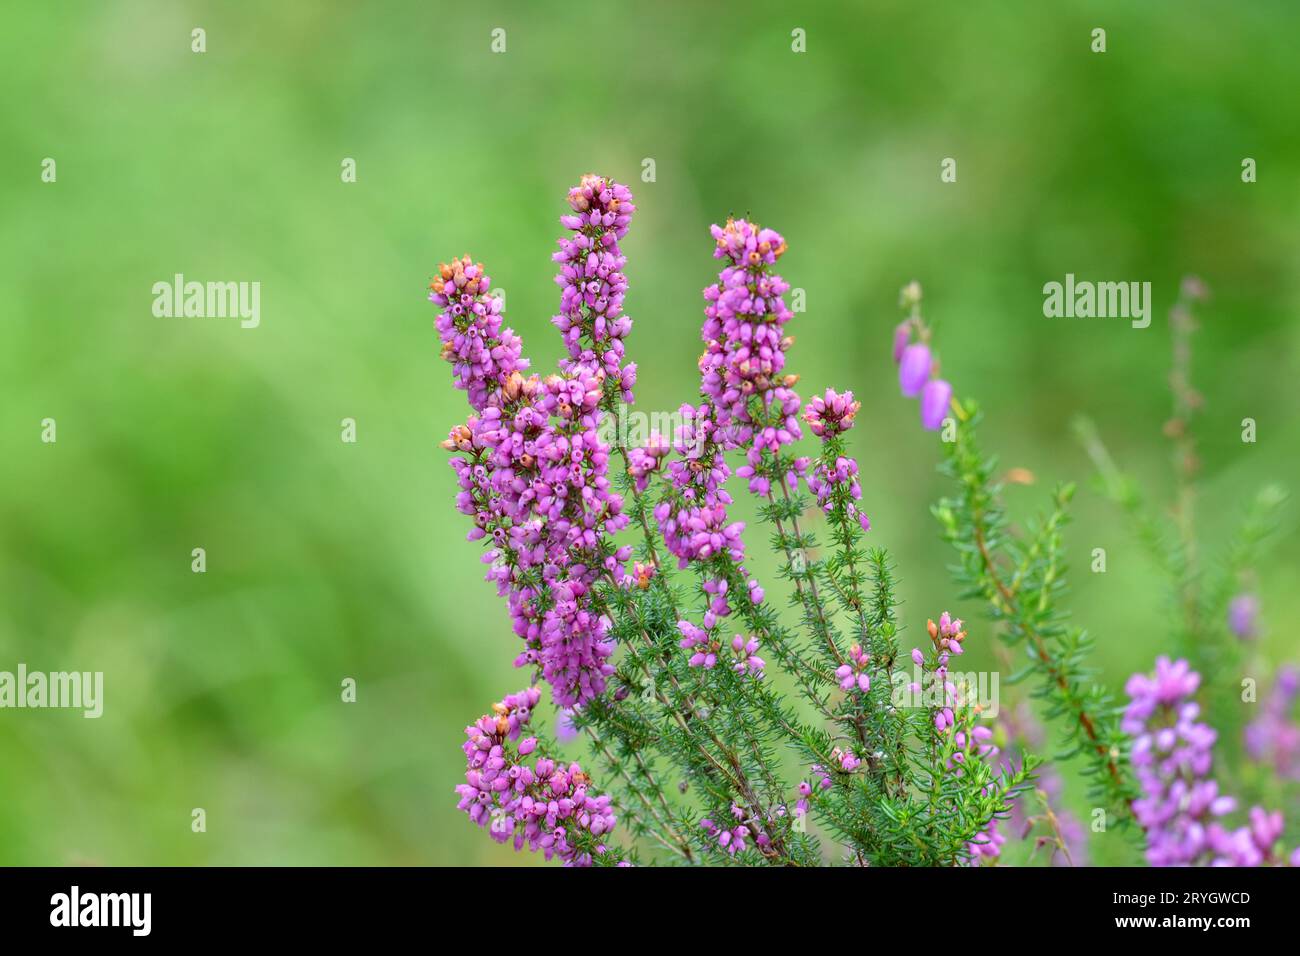 Flowers of the heather Erica cinerea with a green background. Stock Photo